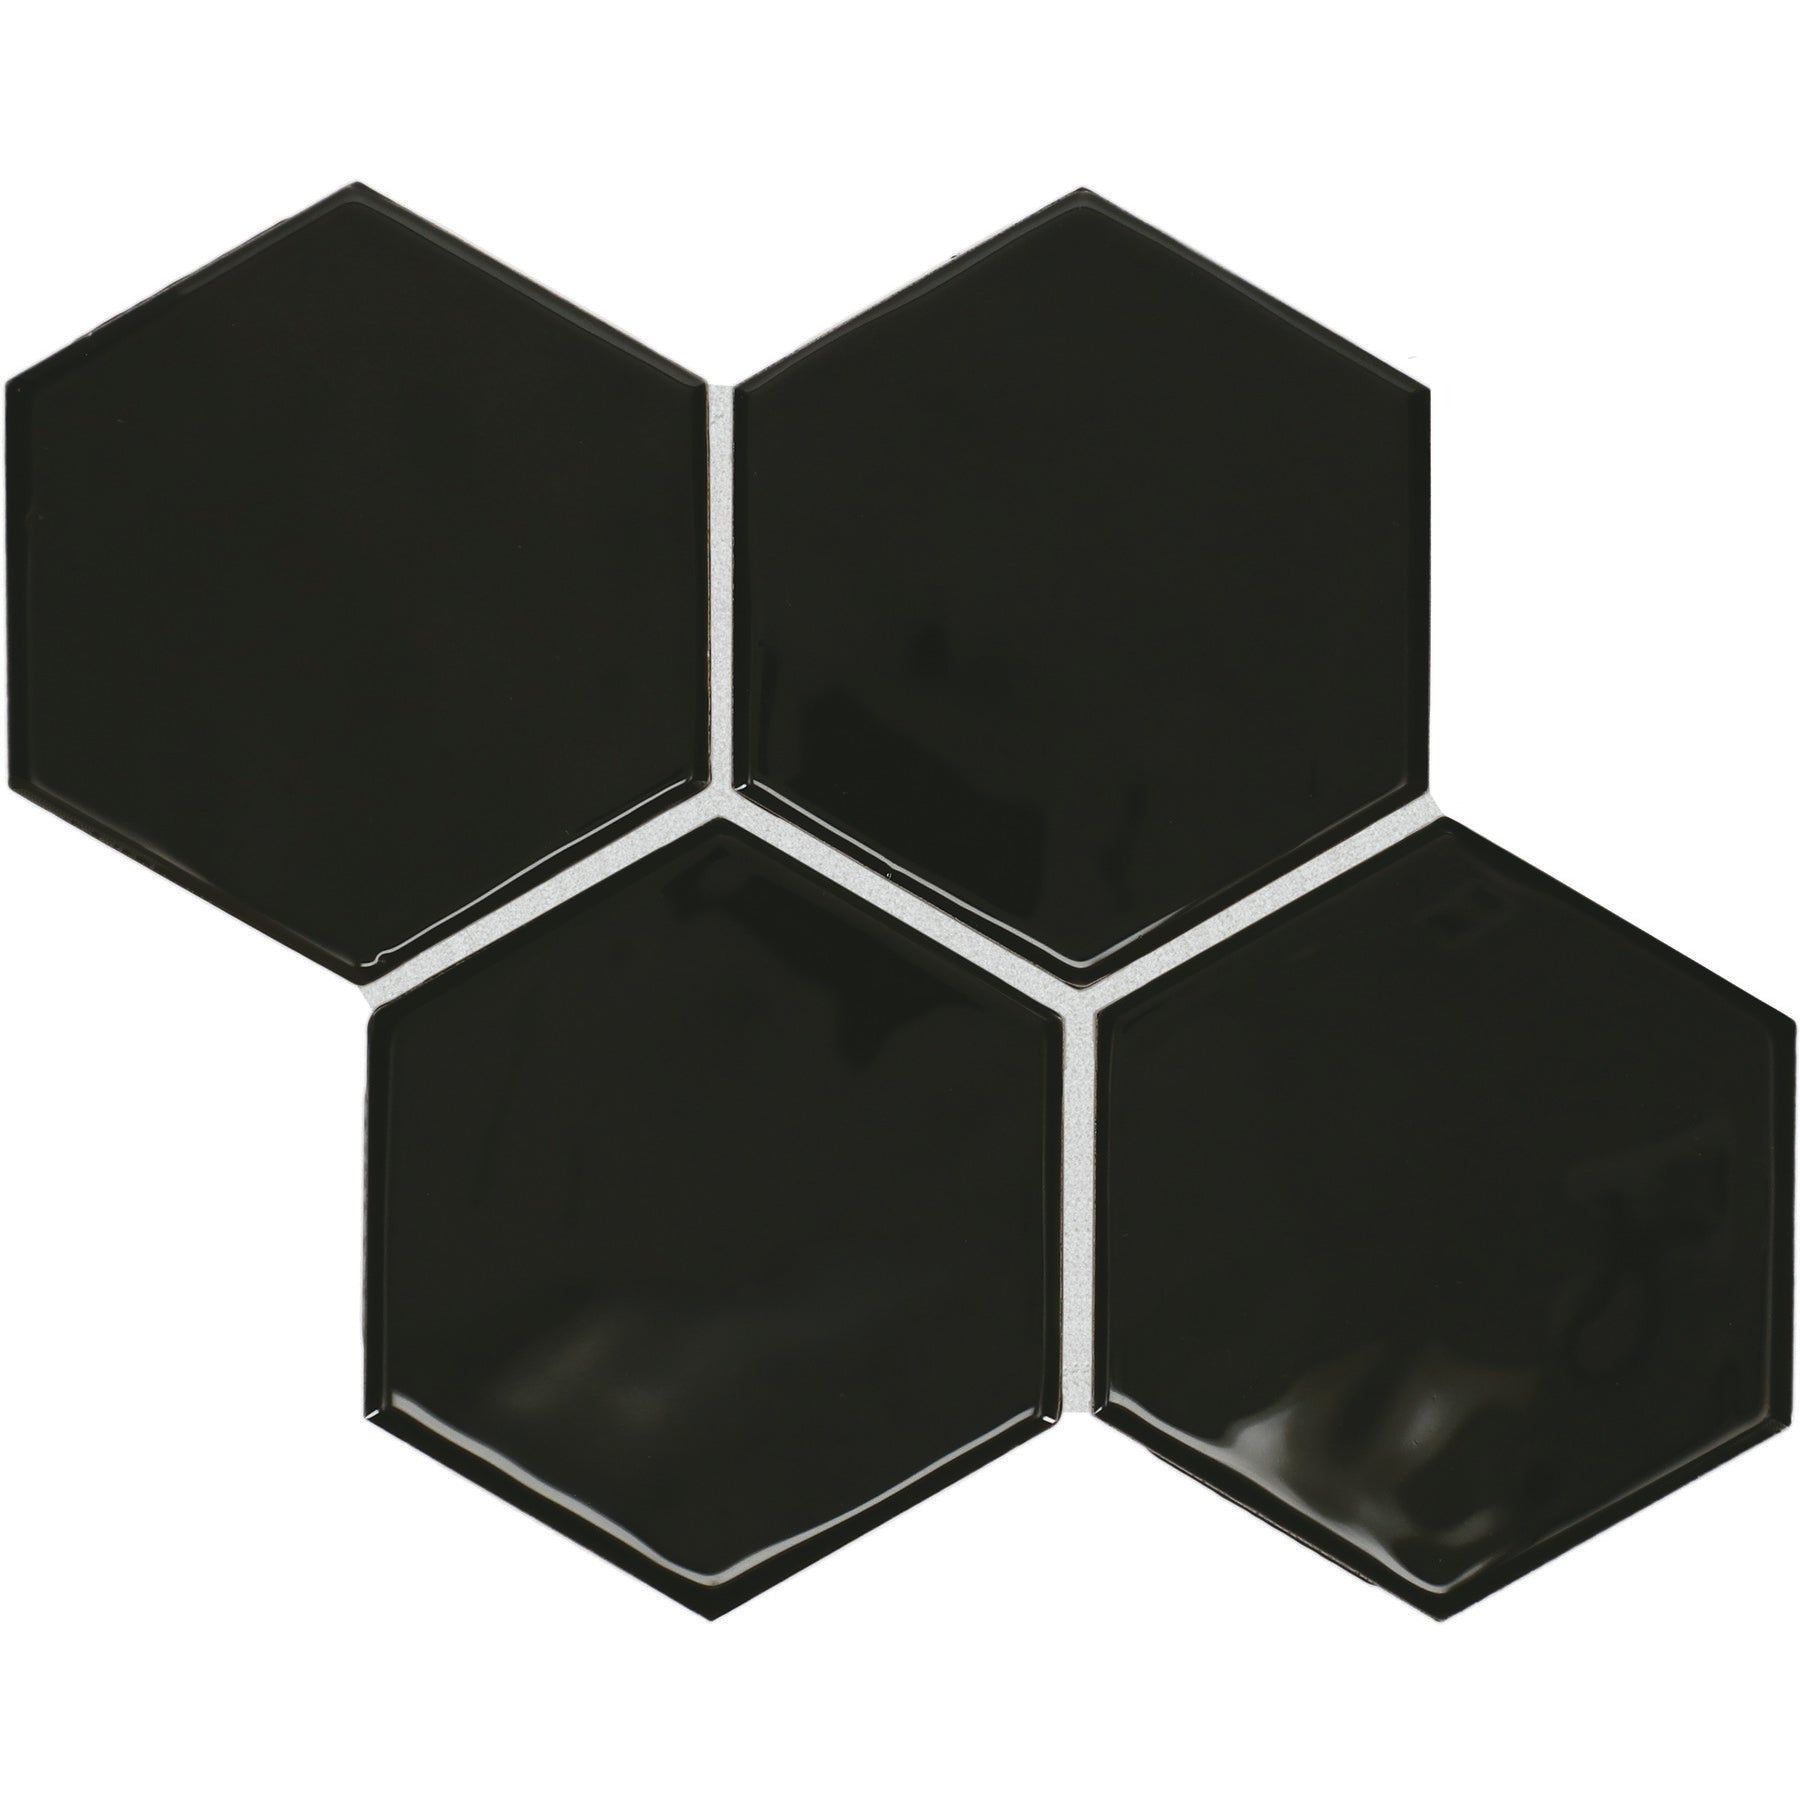 American Olean - Playscapes Hex Wall Tile - Pitch Black PS71 - Floorzz